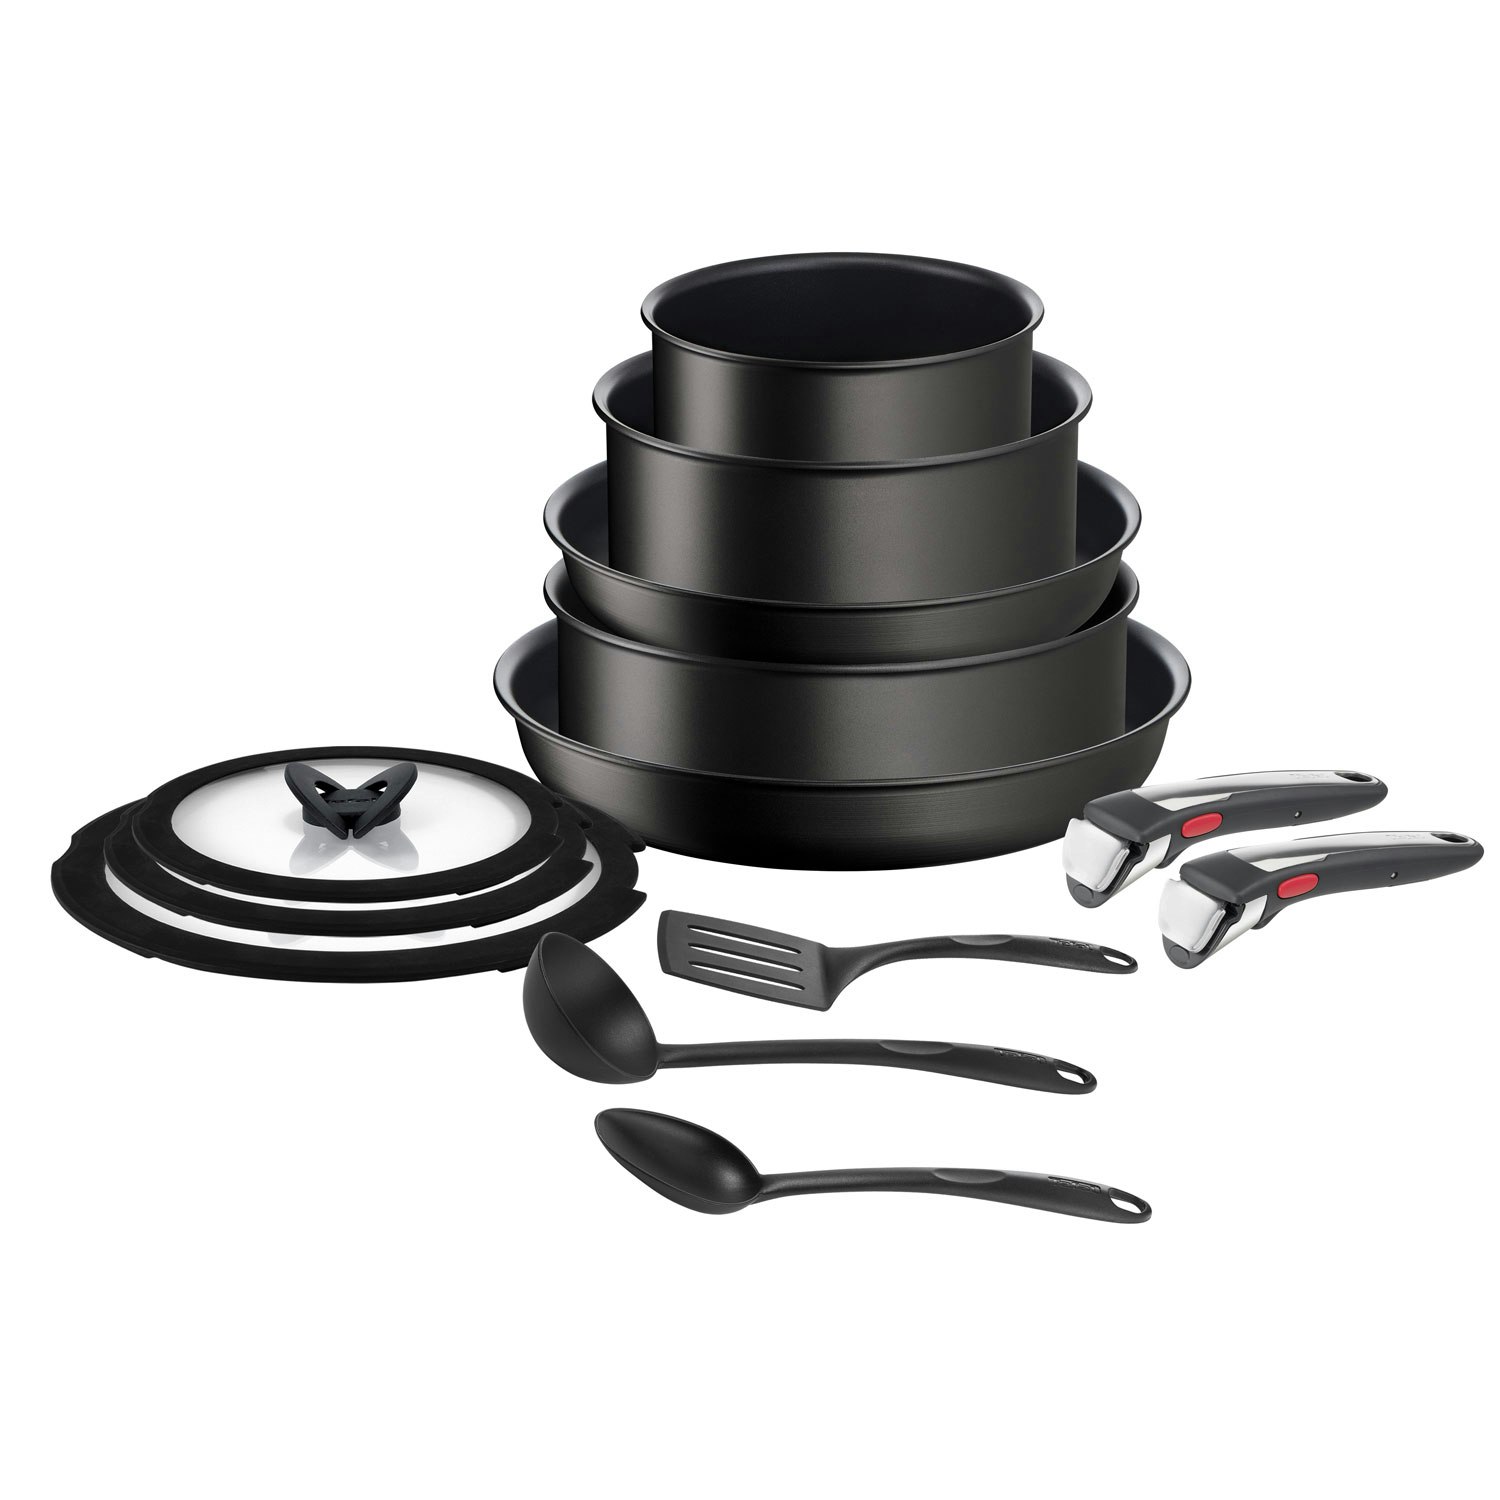 TEFAL Ingenio Preference Cookware Set - 13 Piece…